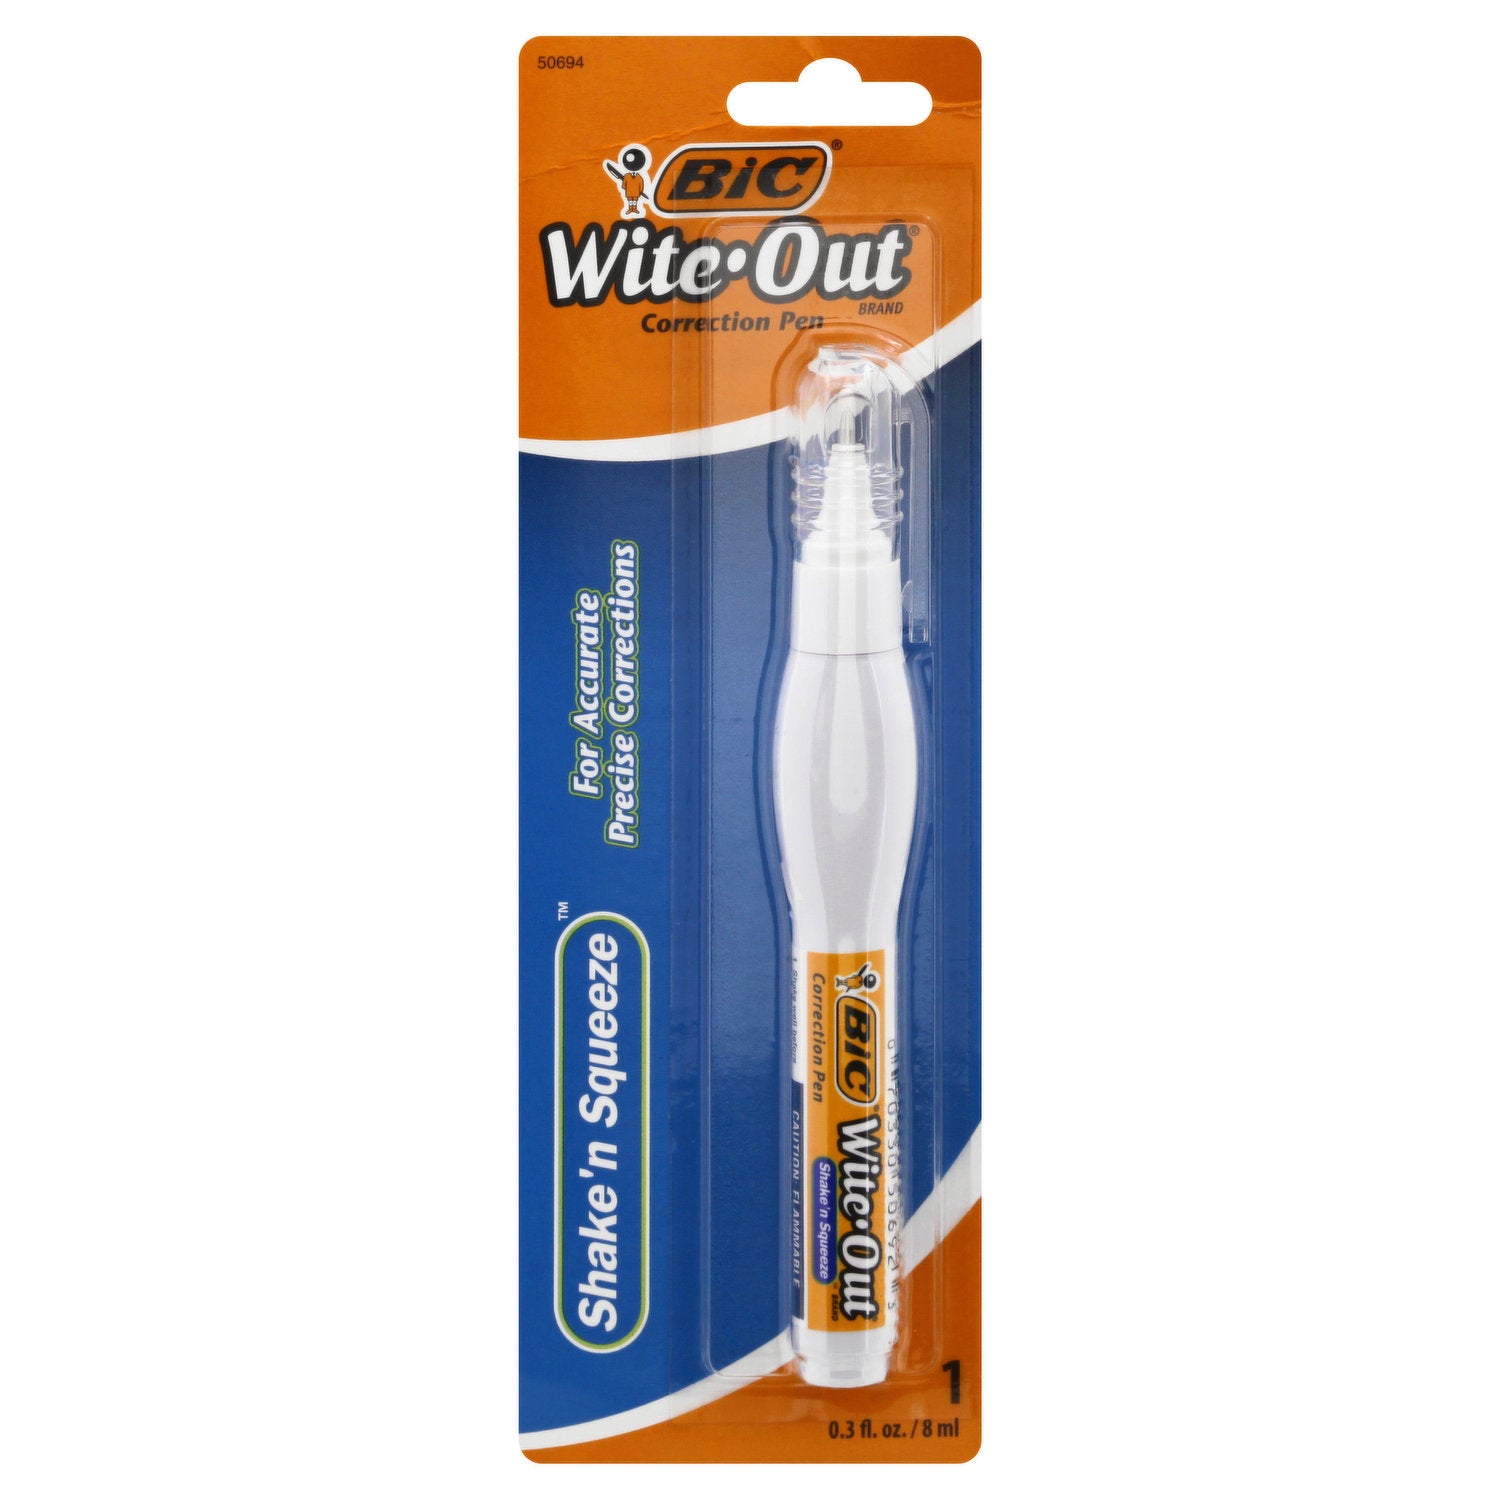 BIC Wite-Out Brand Shake 'n Squeeze Correction Pen, 8 ML